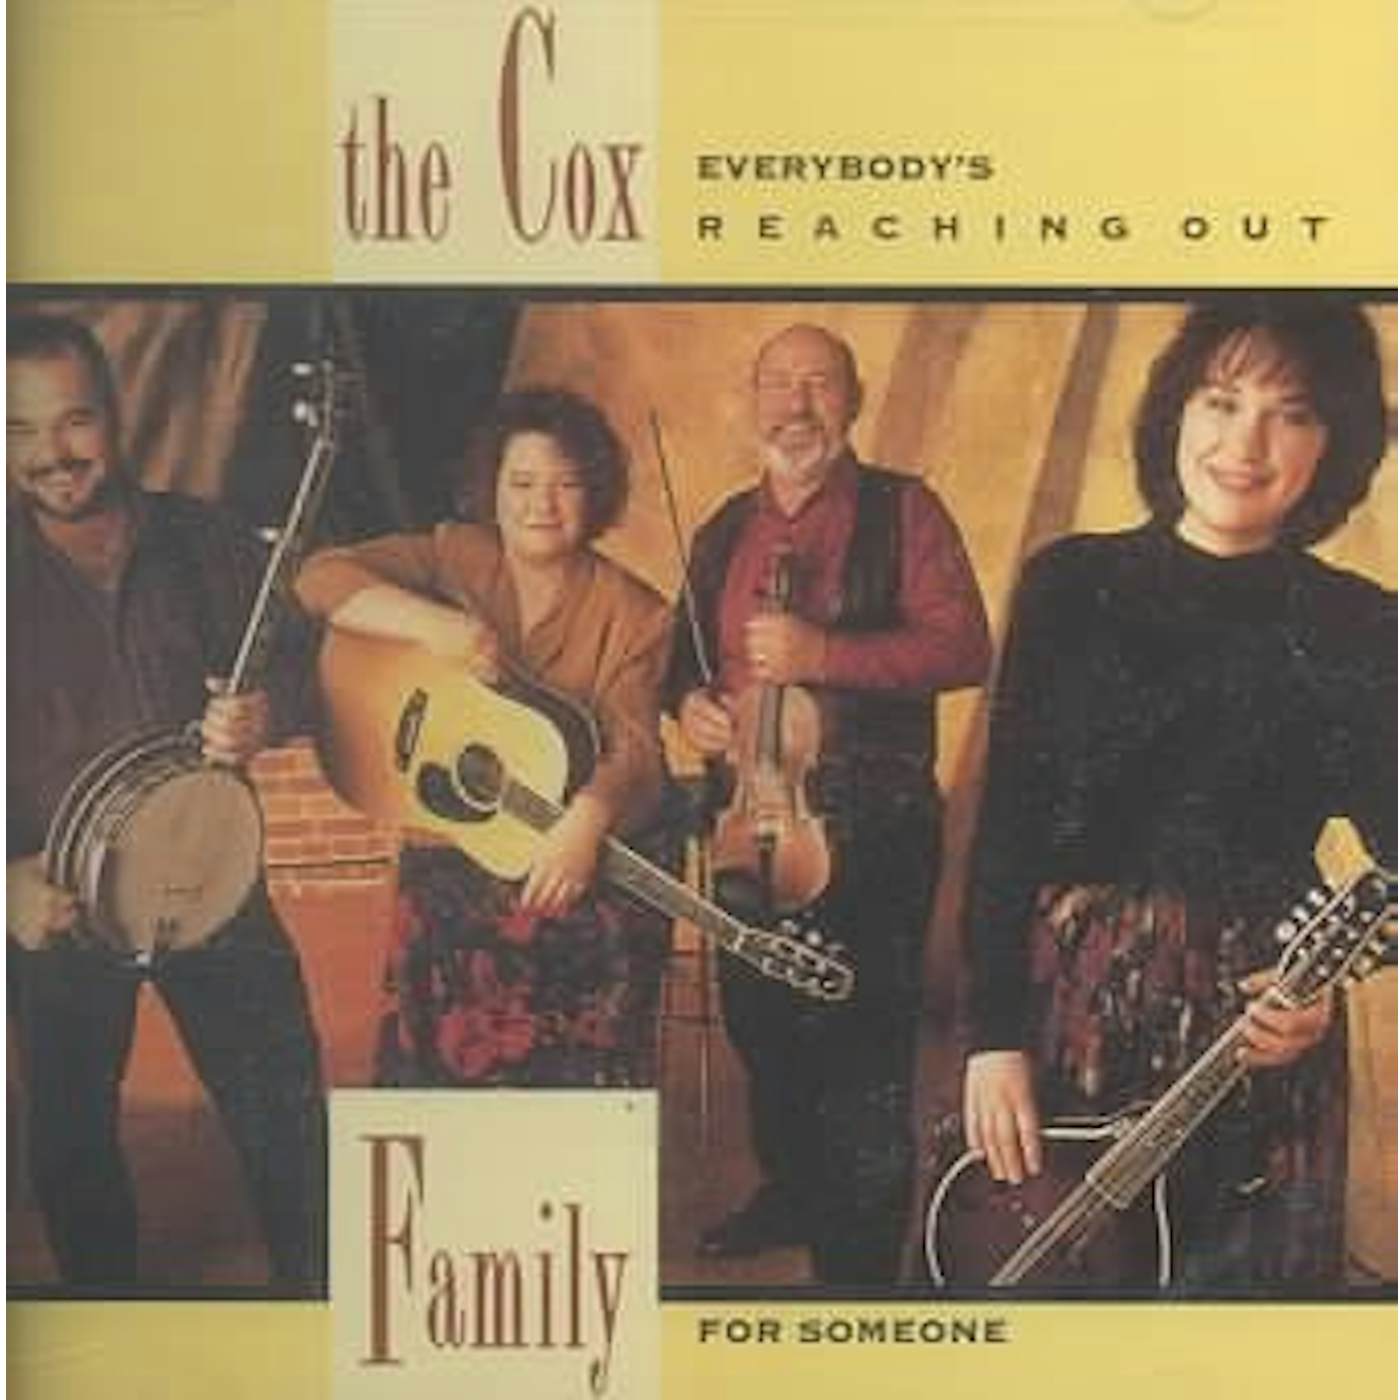 The Cox Family Everybody's Reaching Out For Someone CD